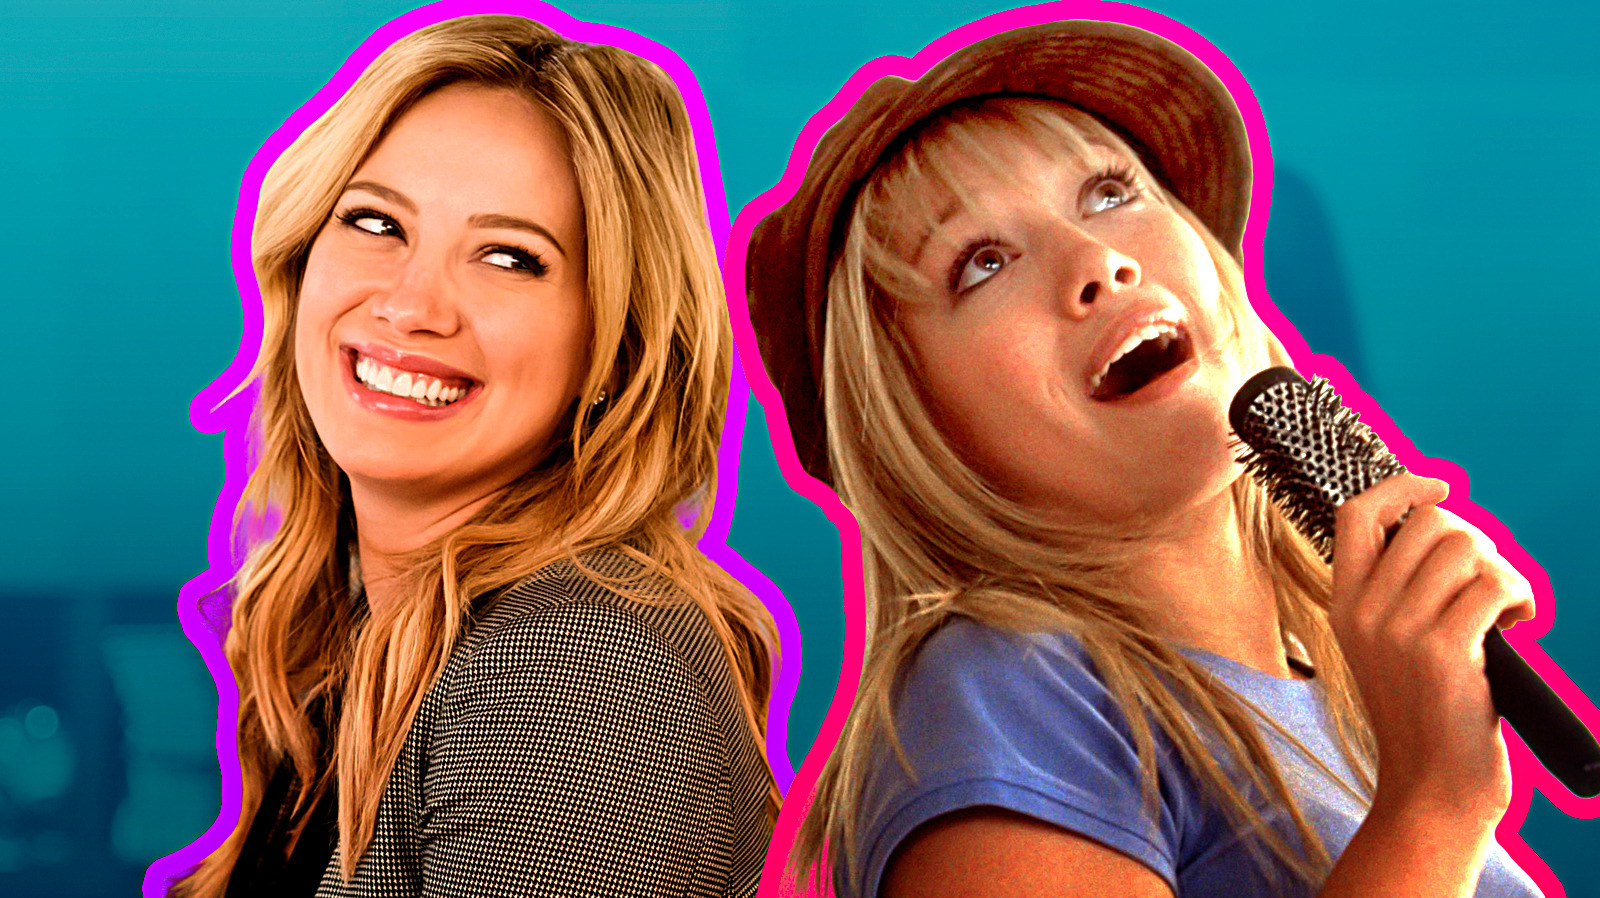 One Scrapped Lizzie Mcguire Reboot Storyline Was Likely Too Explicit